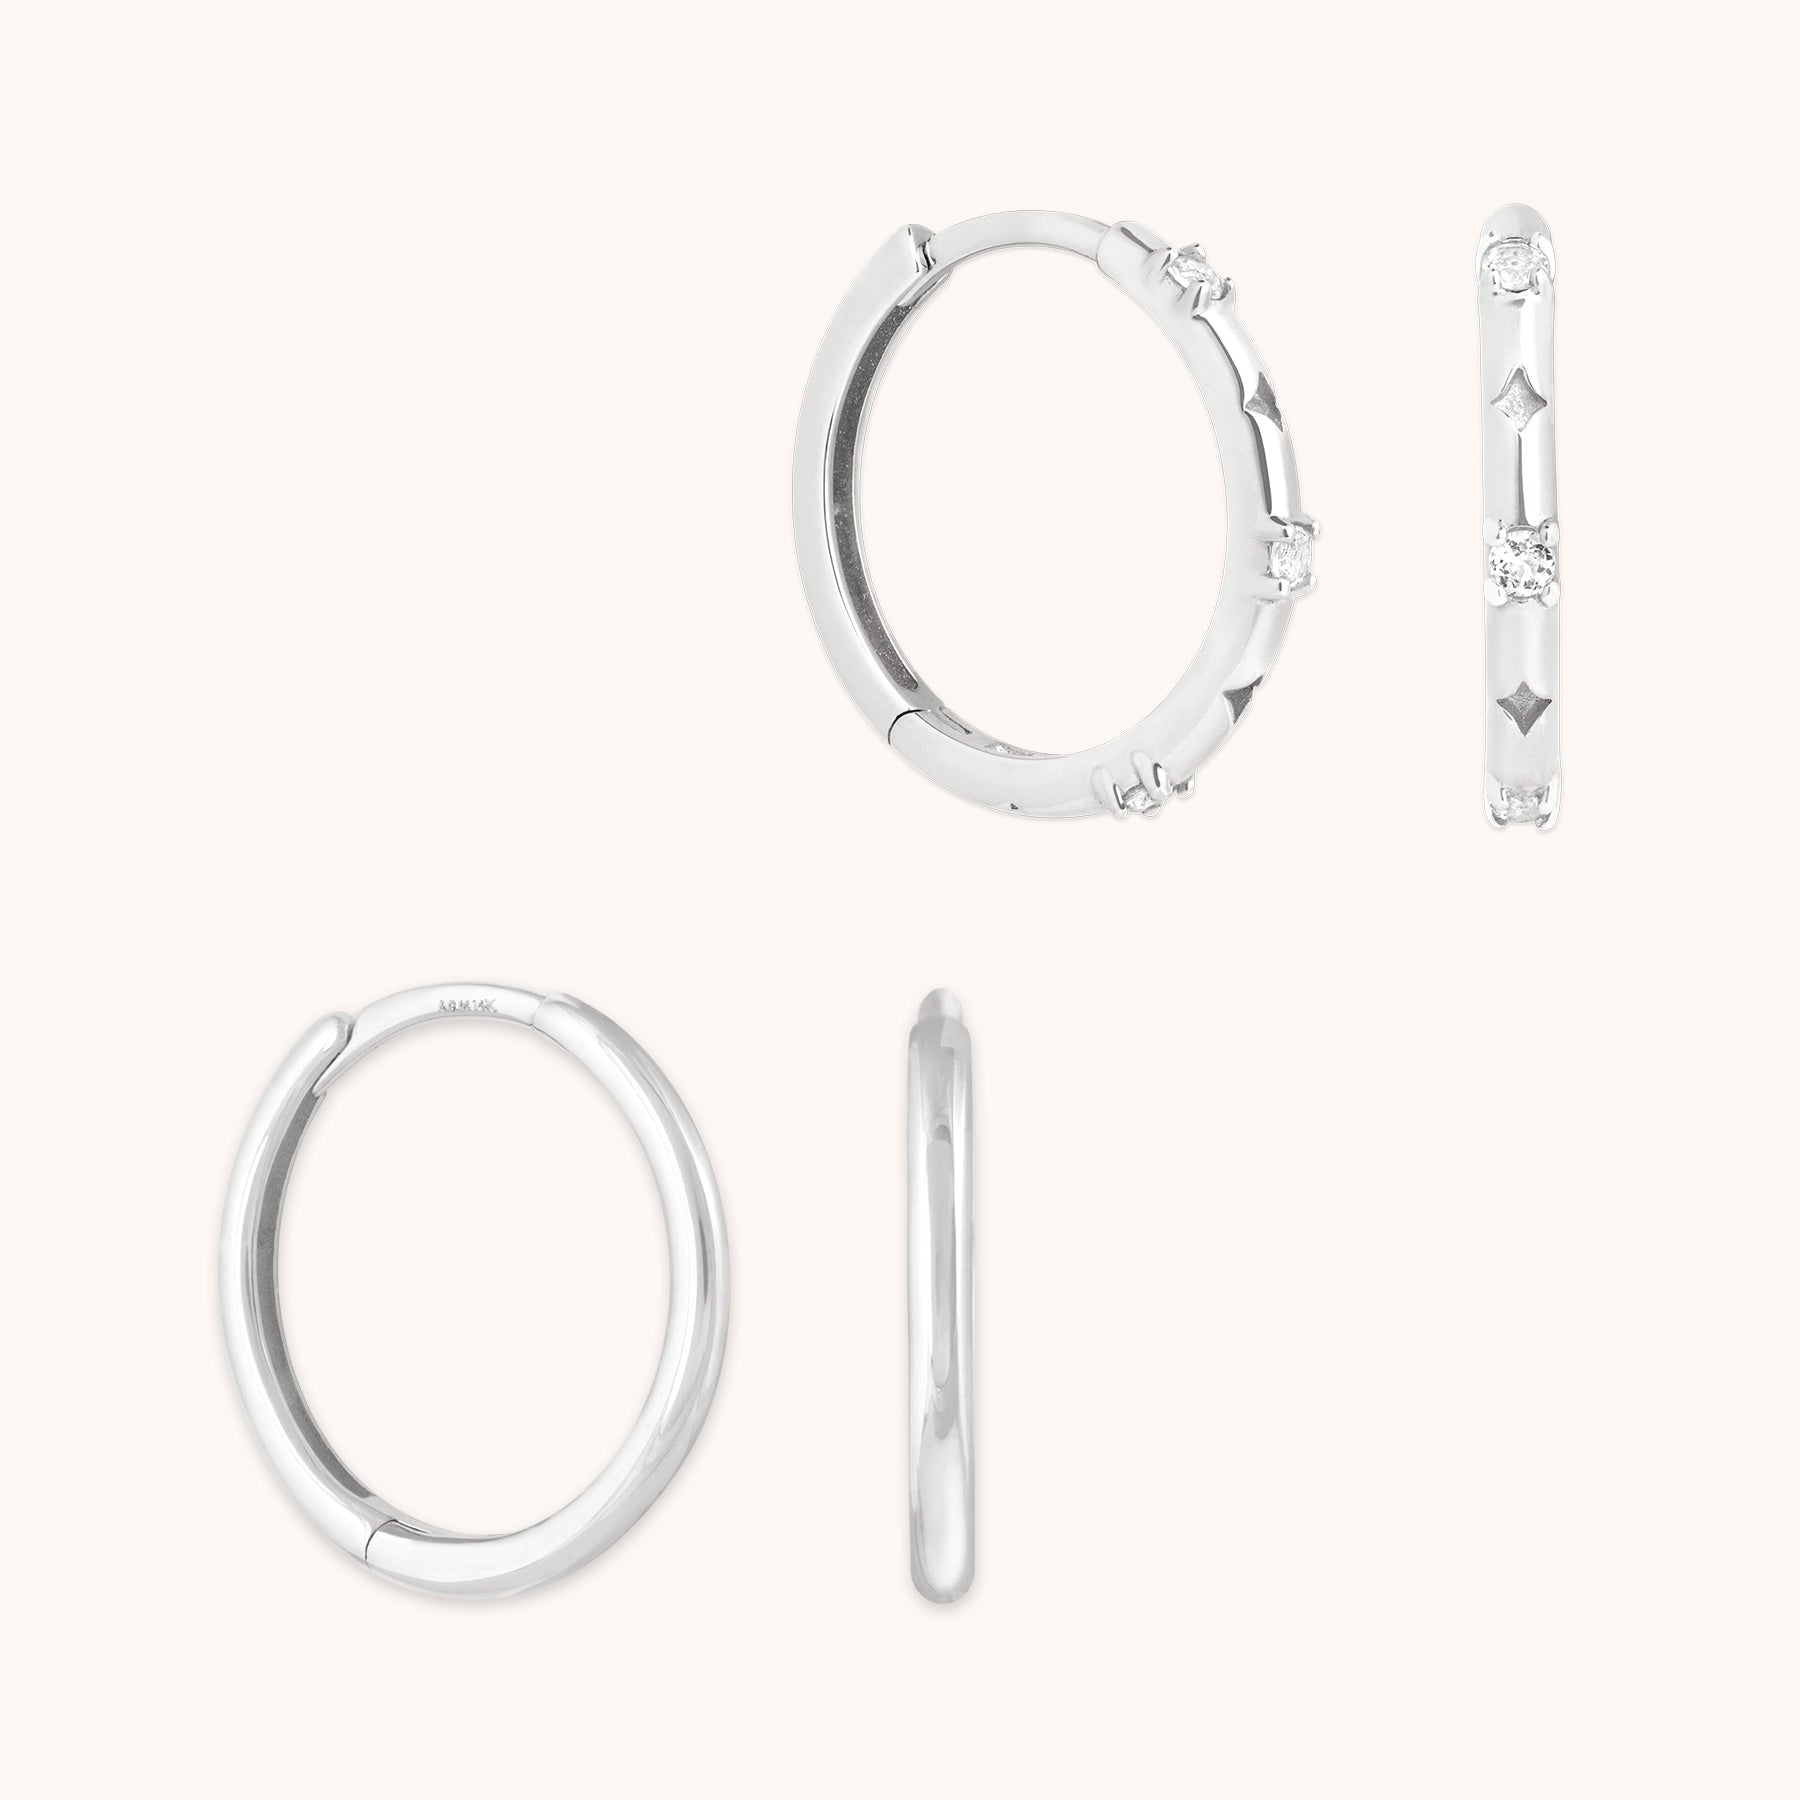 Cosmic Solid White Gold Earring Gift Set | Astrid & Miyu Gifts